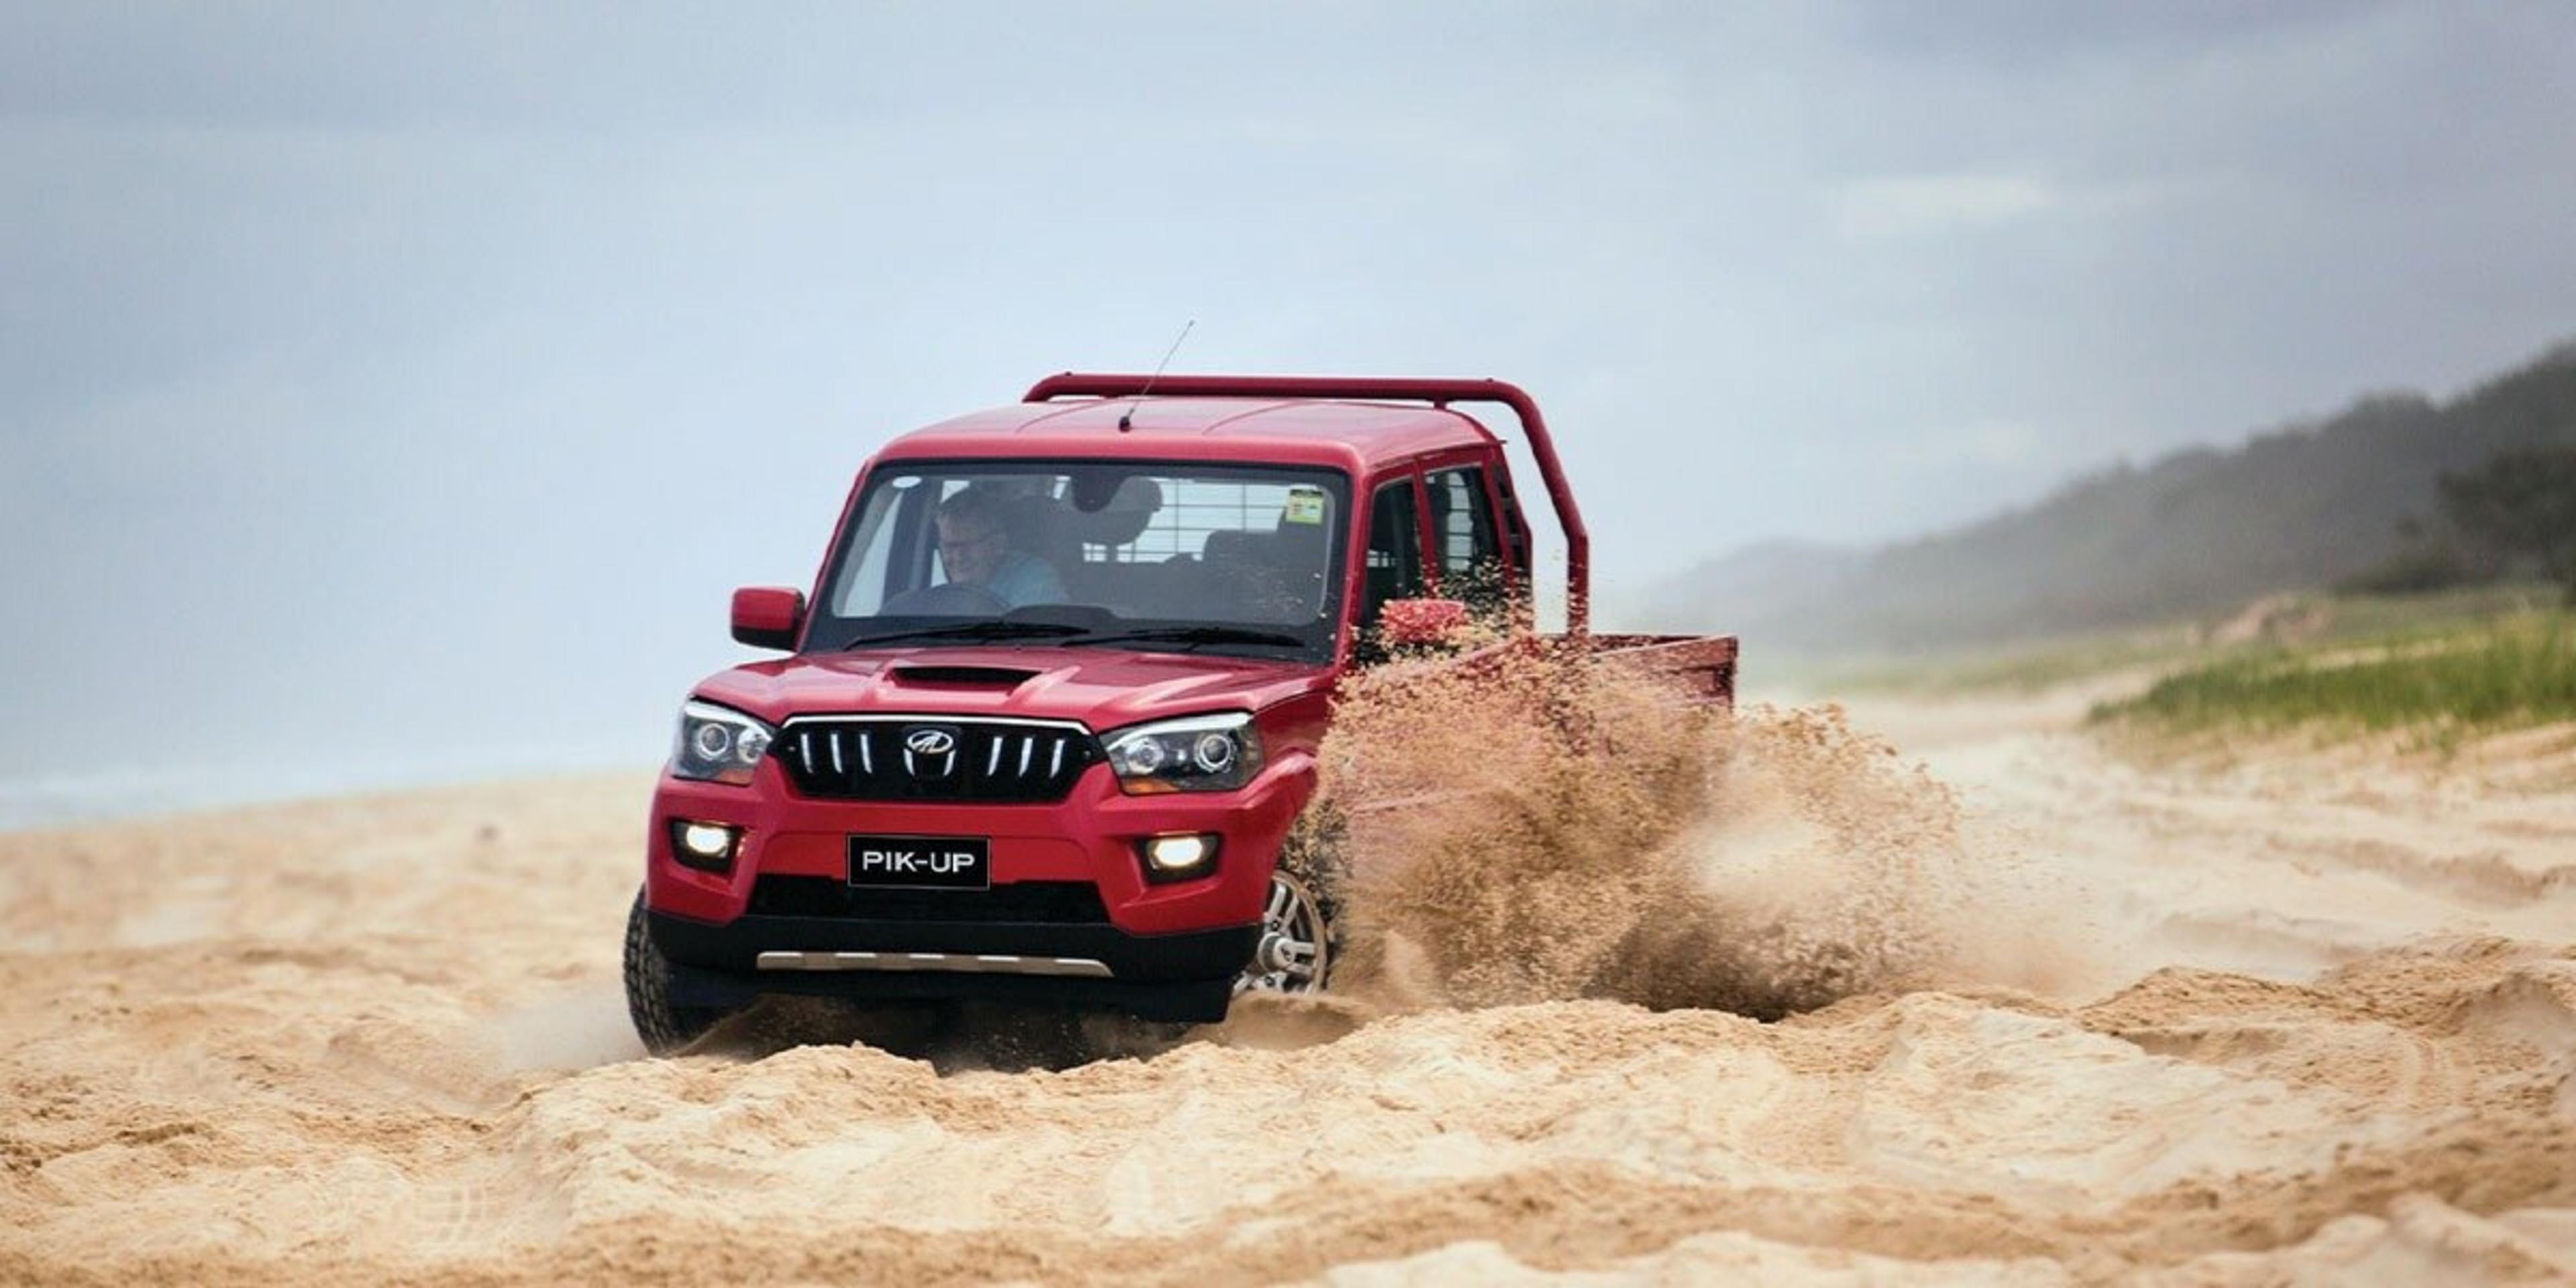 Conquer Any Terrain: Exploring the Mahindra PIK-UP S11 4X4 featured image